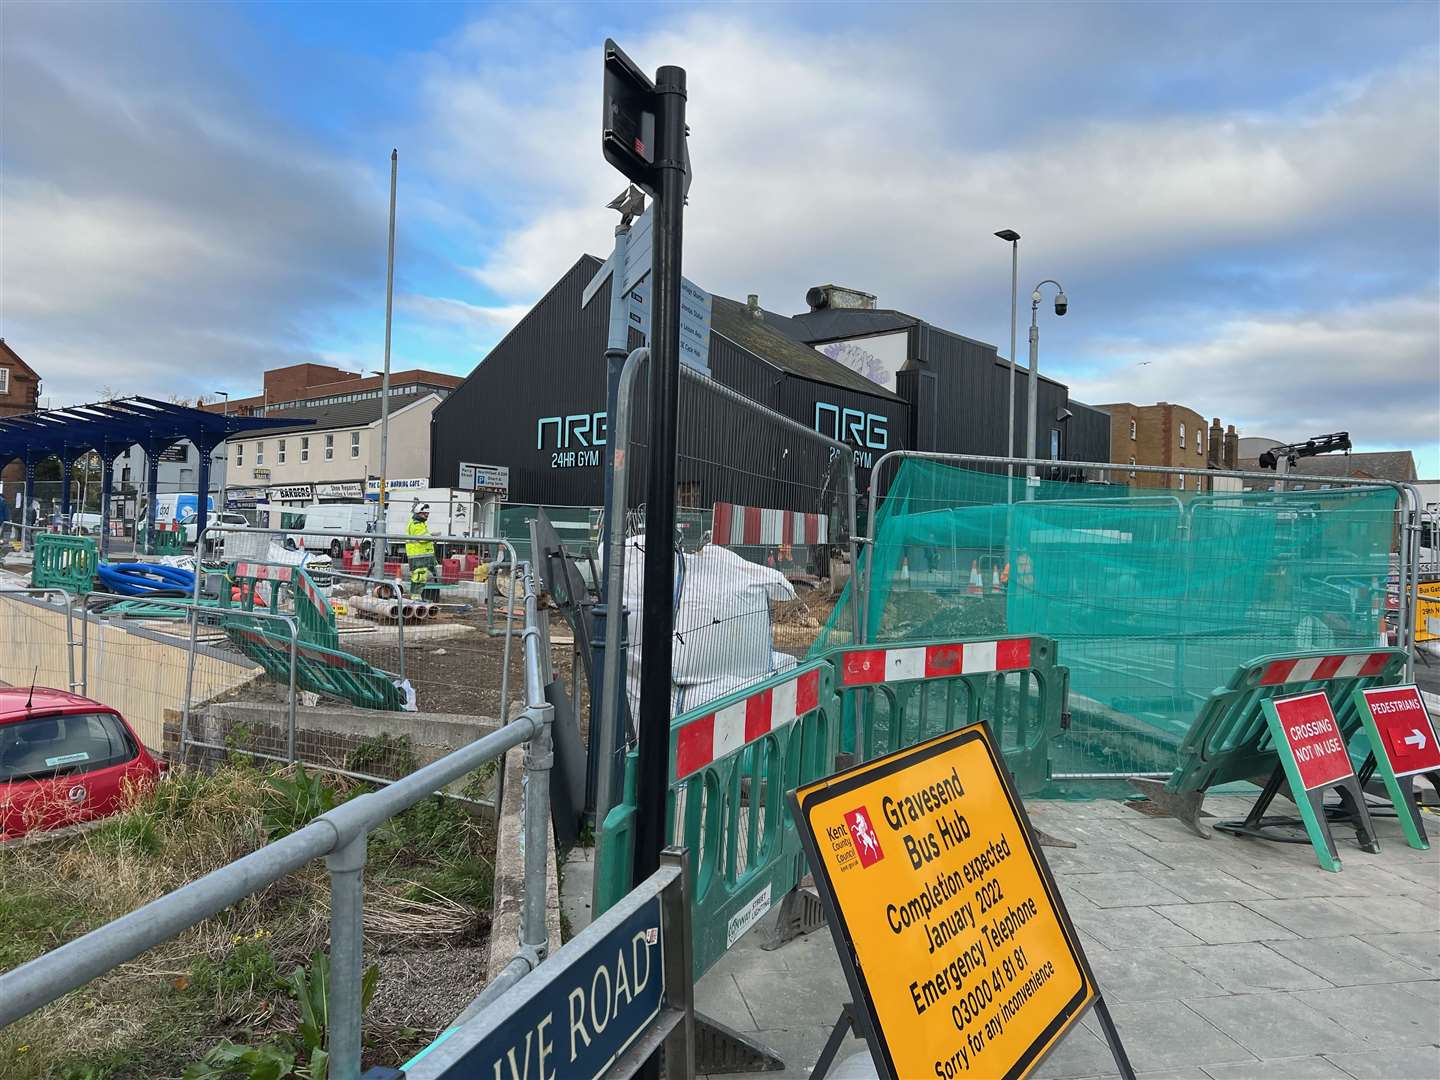 Construction work for the new bus hub has started